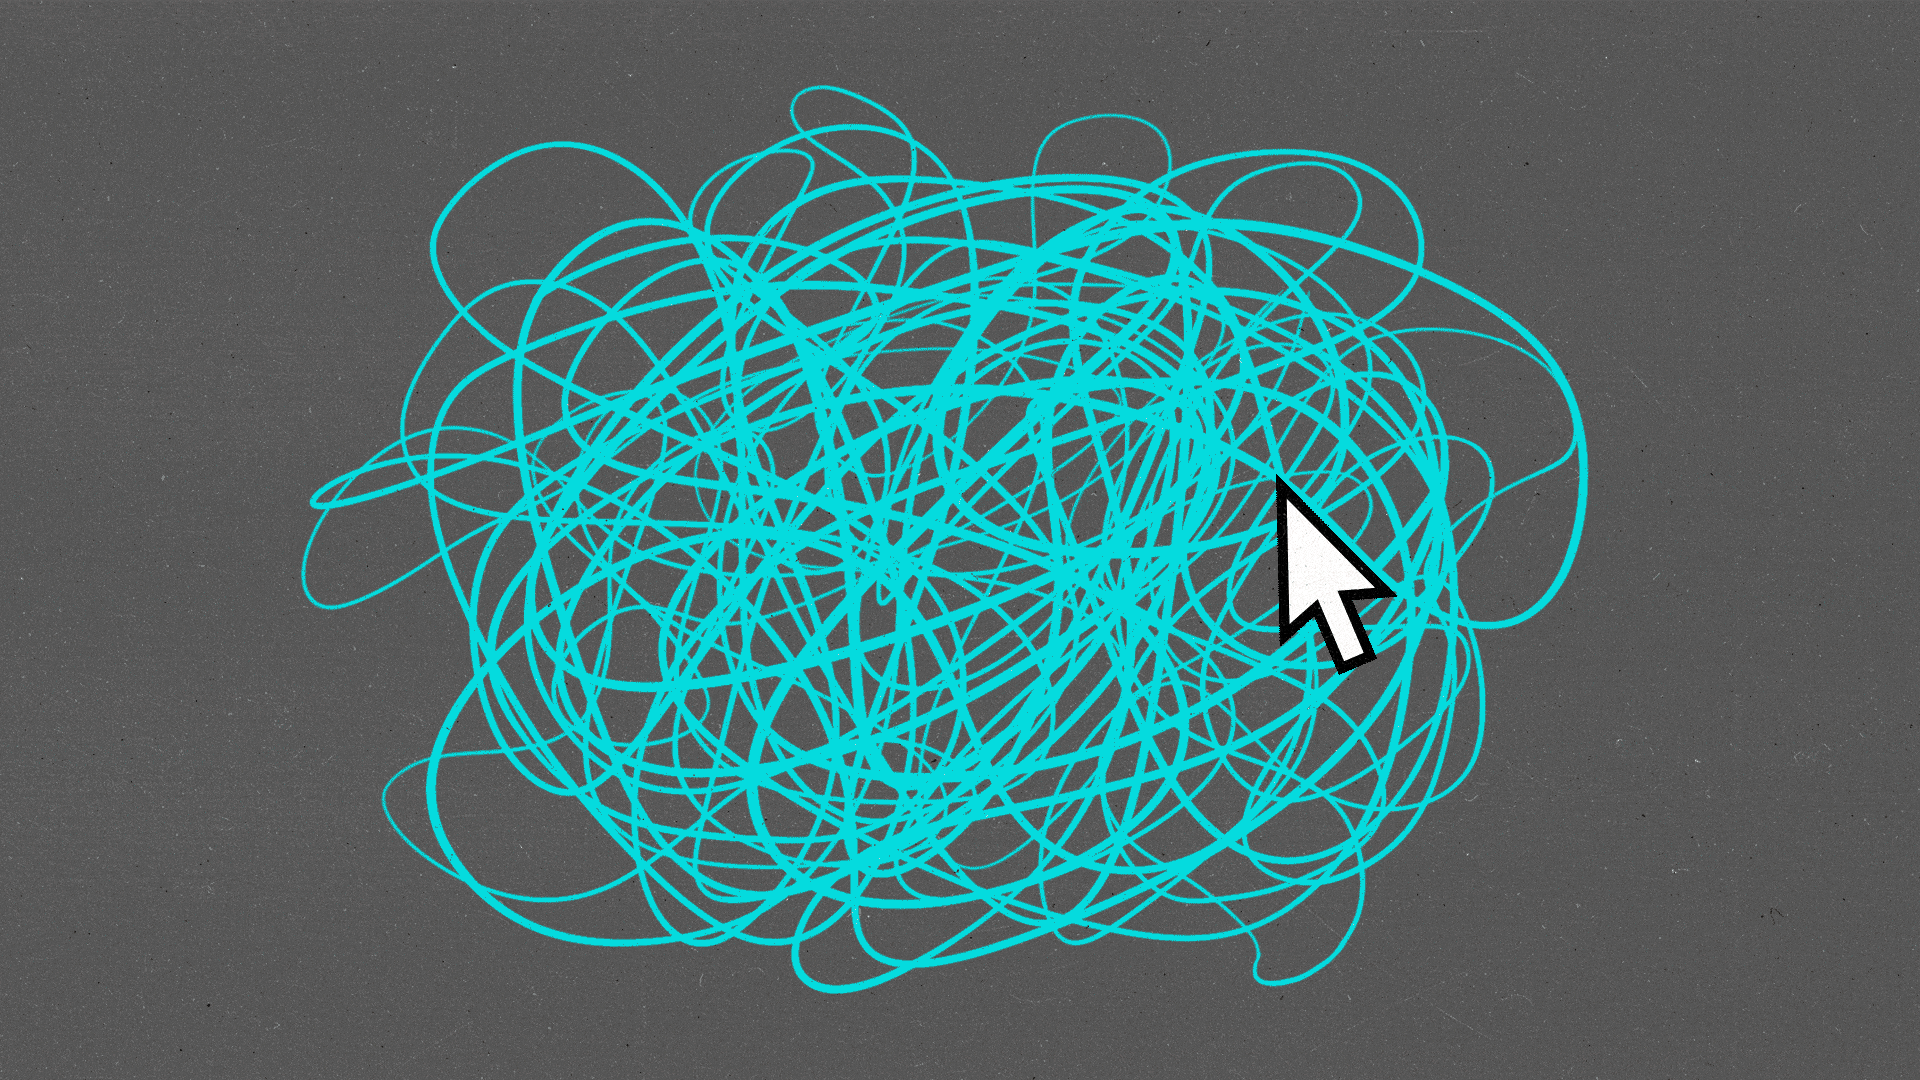 A computer cursor moves around the image on top of a turquoise messy scribble.